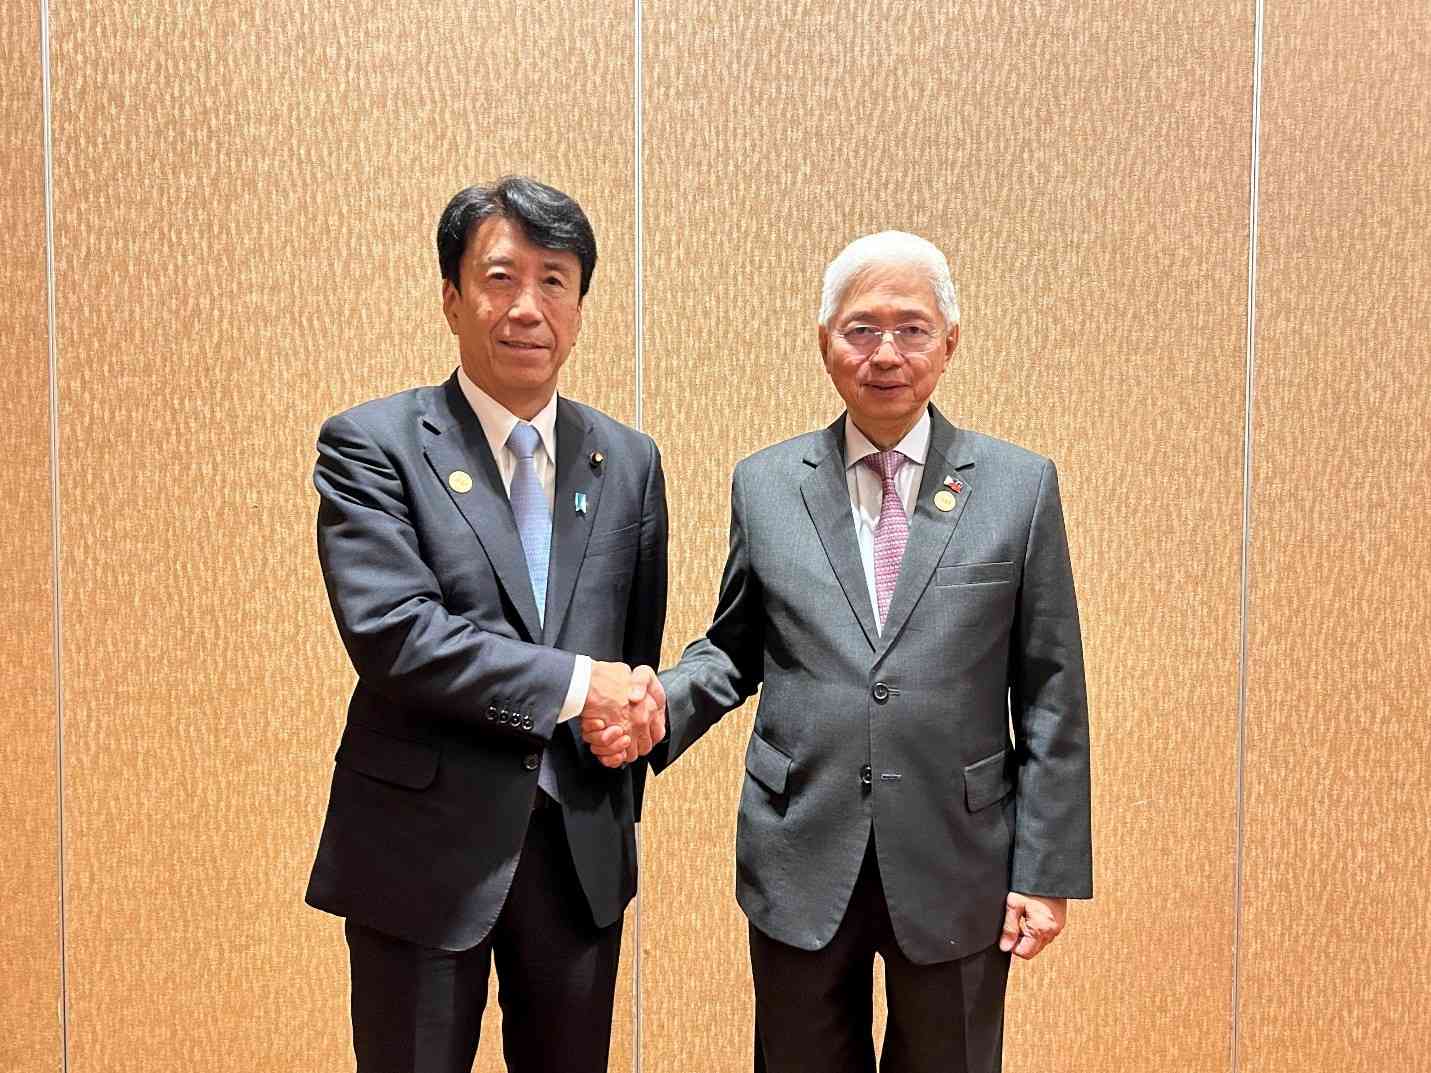 PH, Japan to explore cooperation in clean energy, trade and investment - DTI